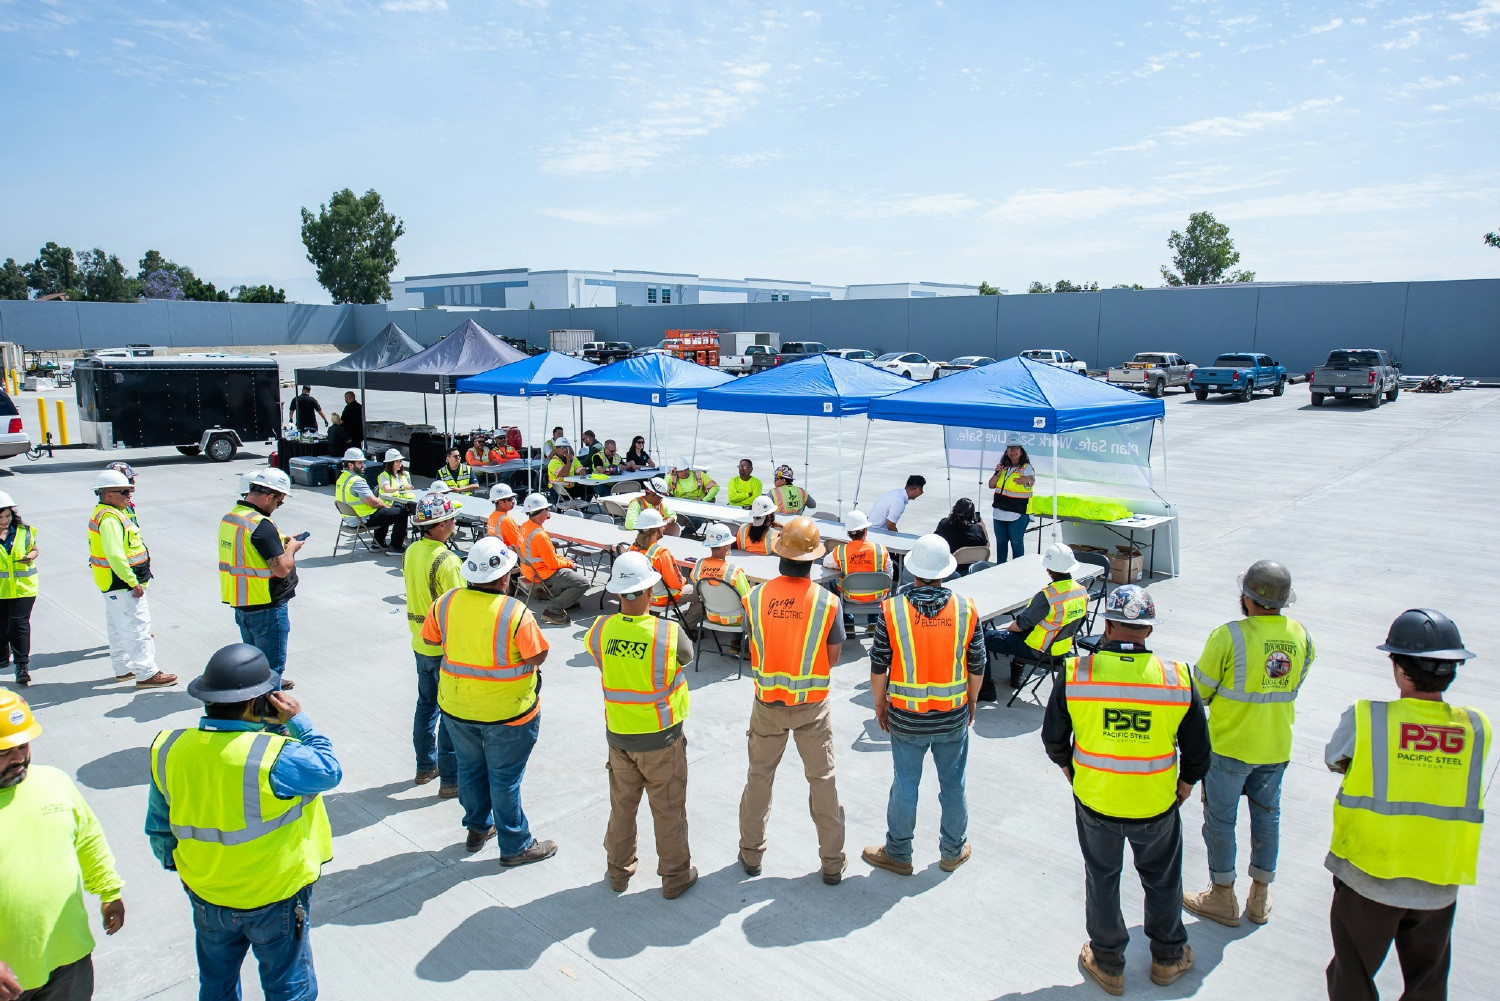 Safety appreciation and milestone jobsite events through the course of construction.